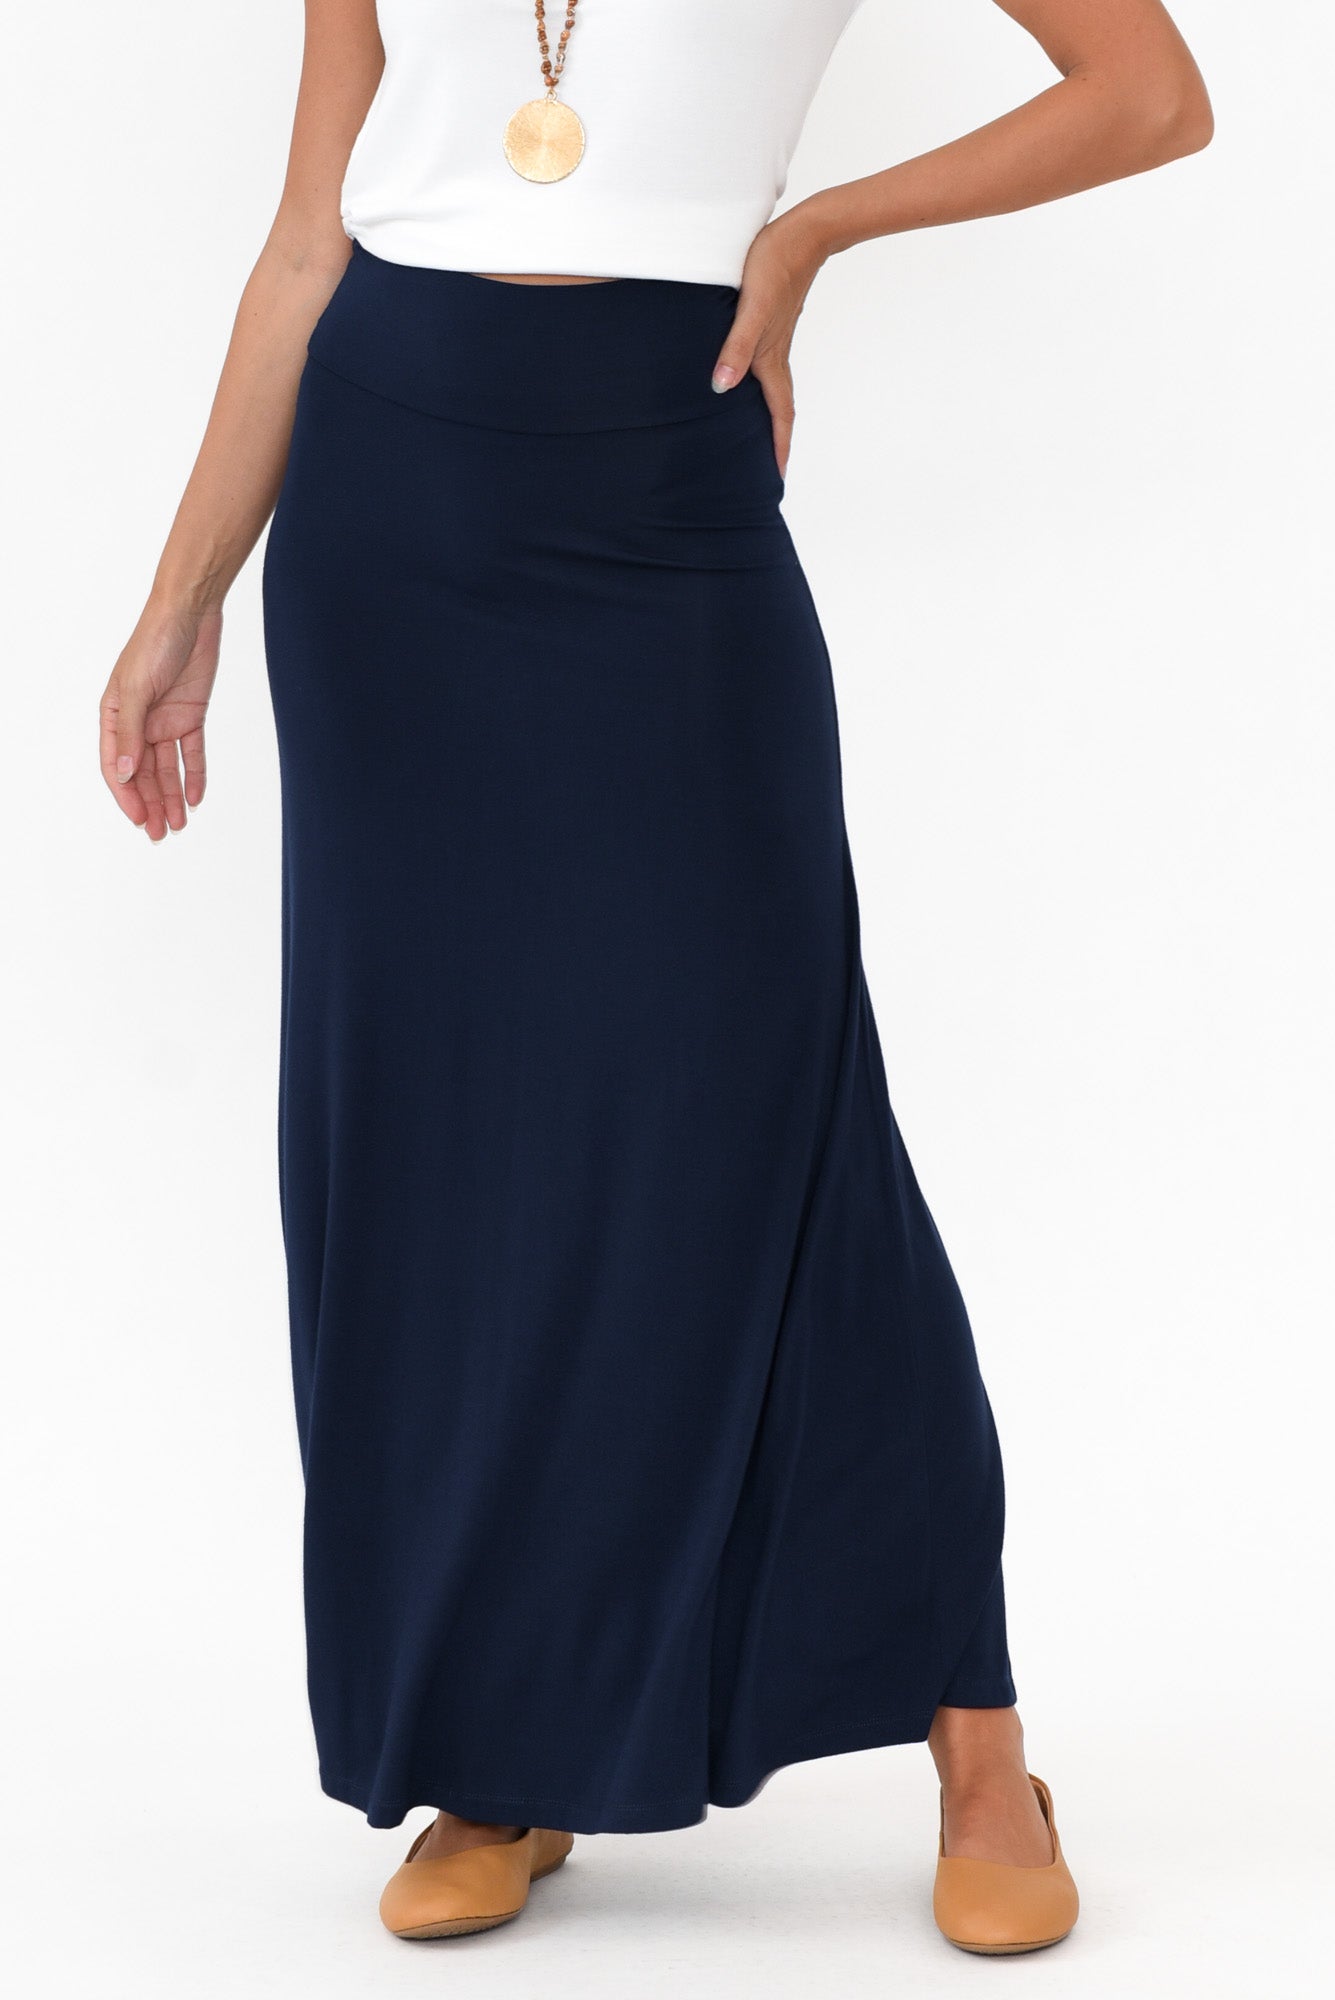 Navy Blue Polyester-Rayon high waisted midi pencil Skirt | Sumissura